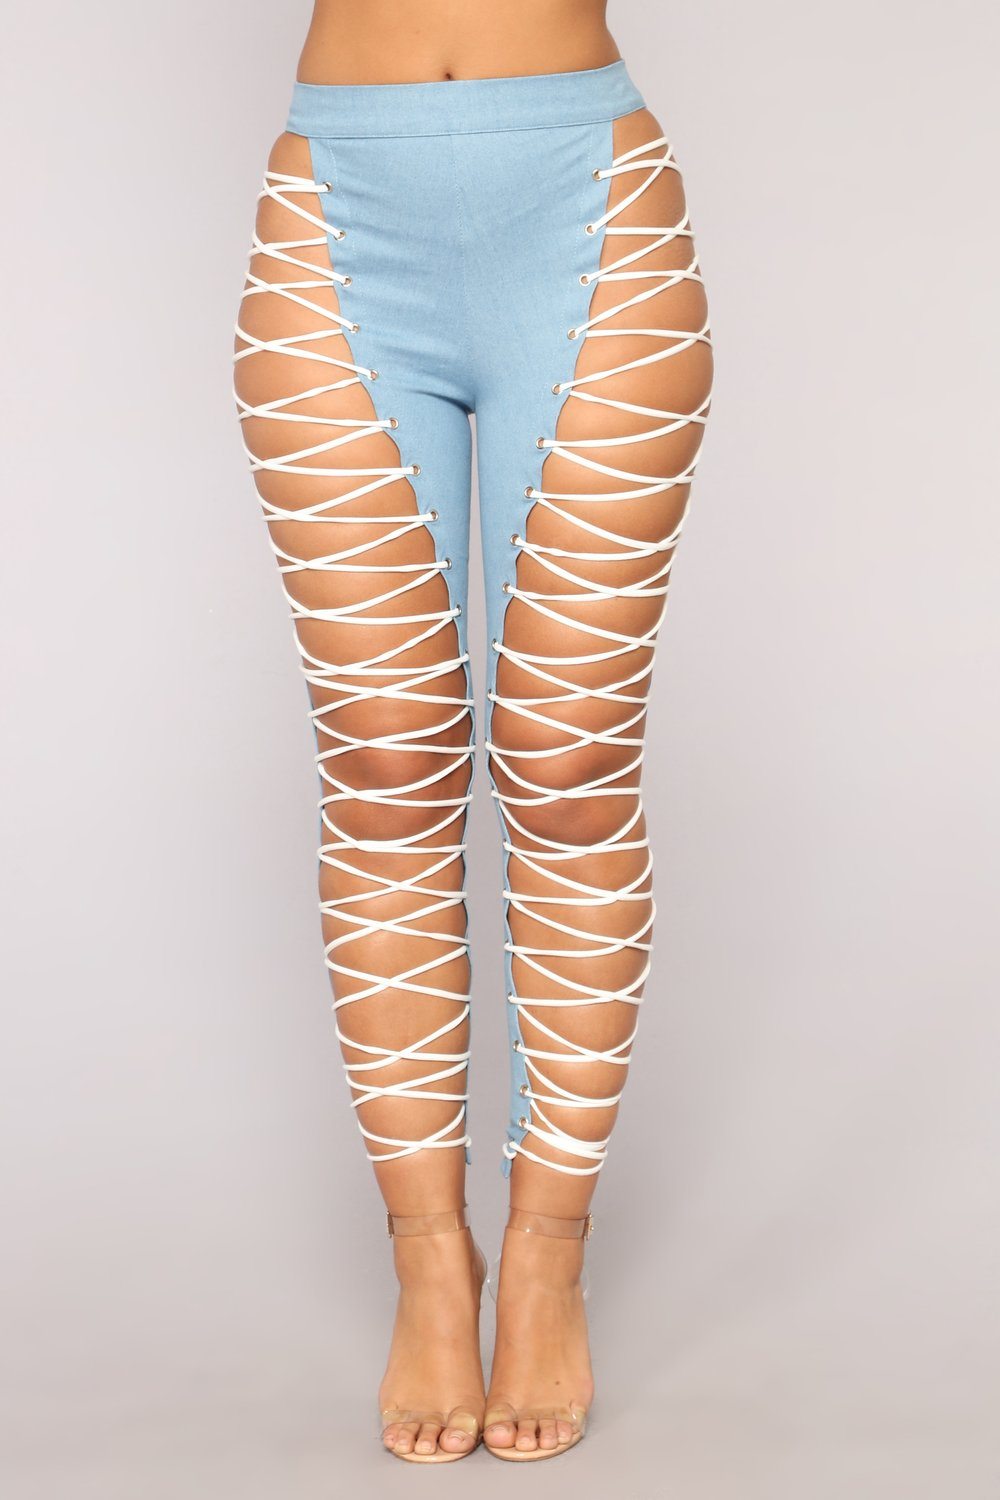 the new jeans trend